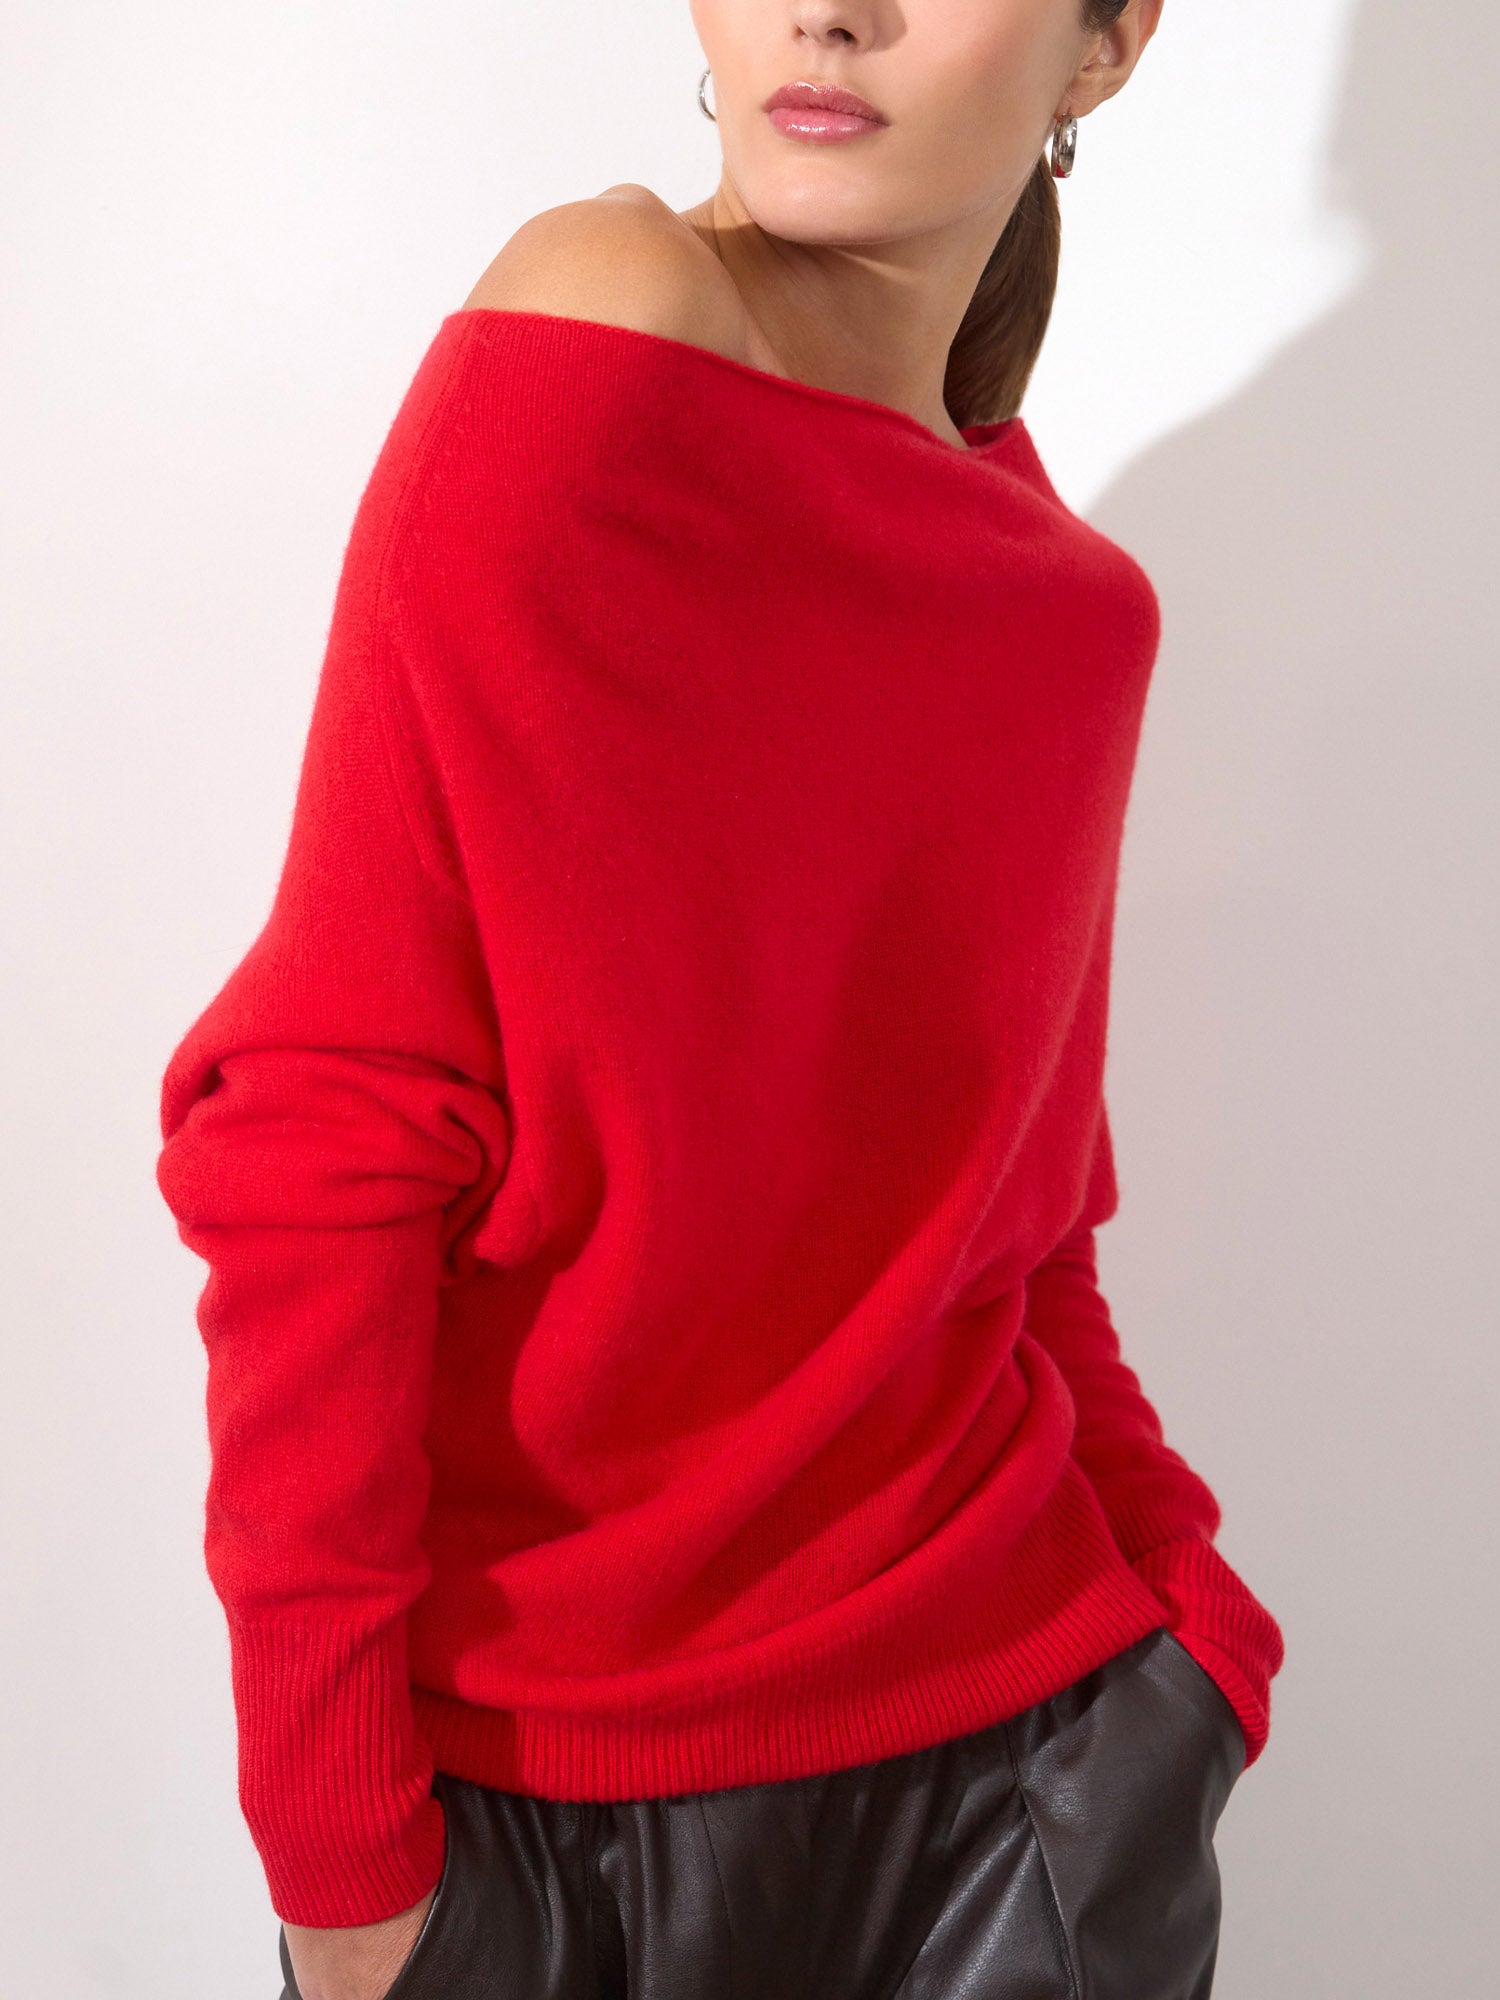 Lori cashmere off shoulder red sweater side view